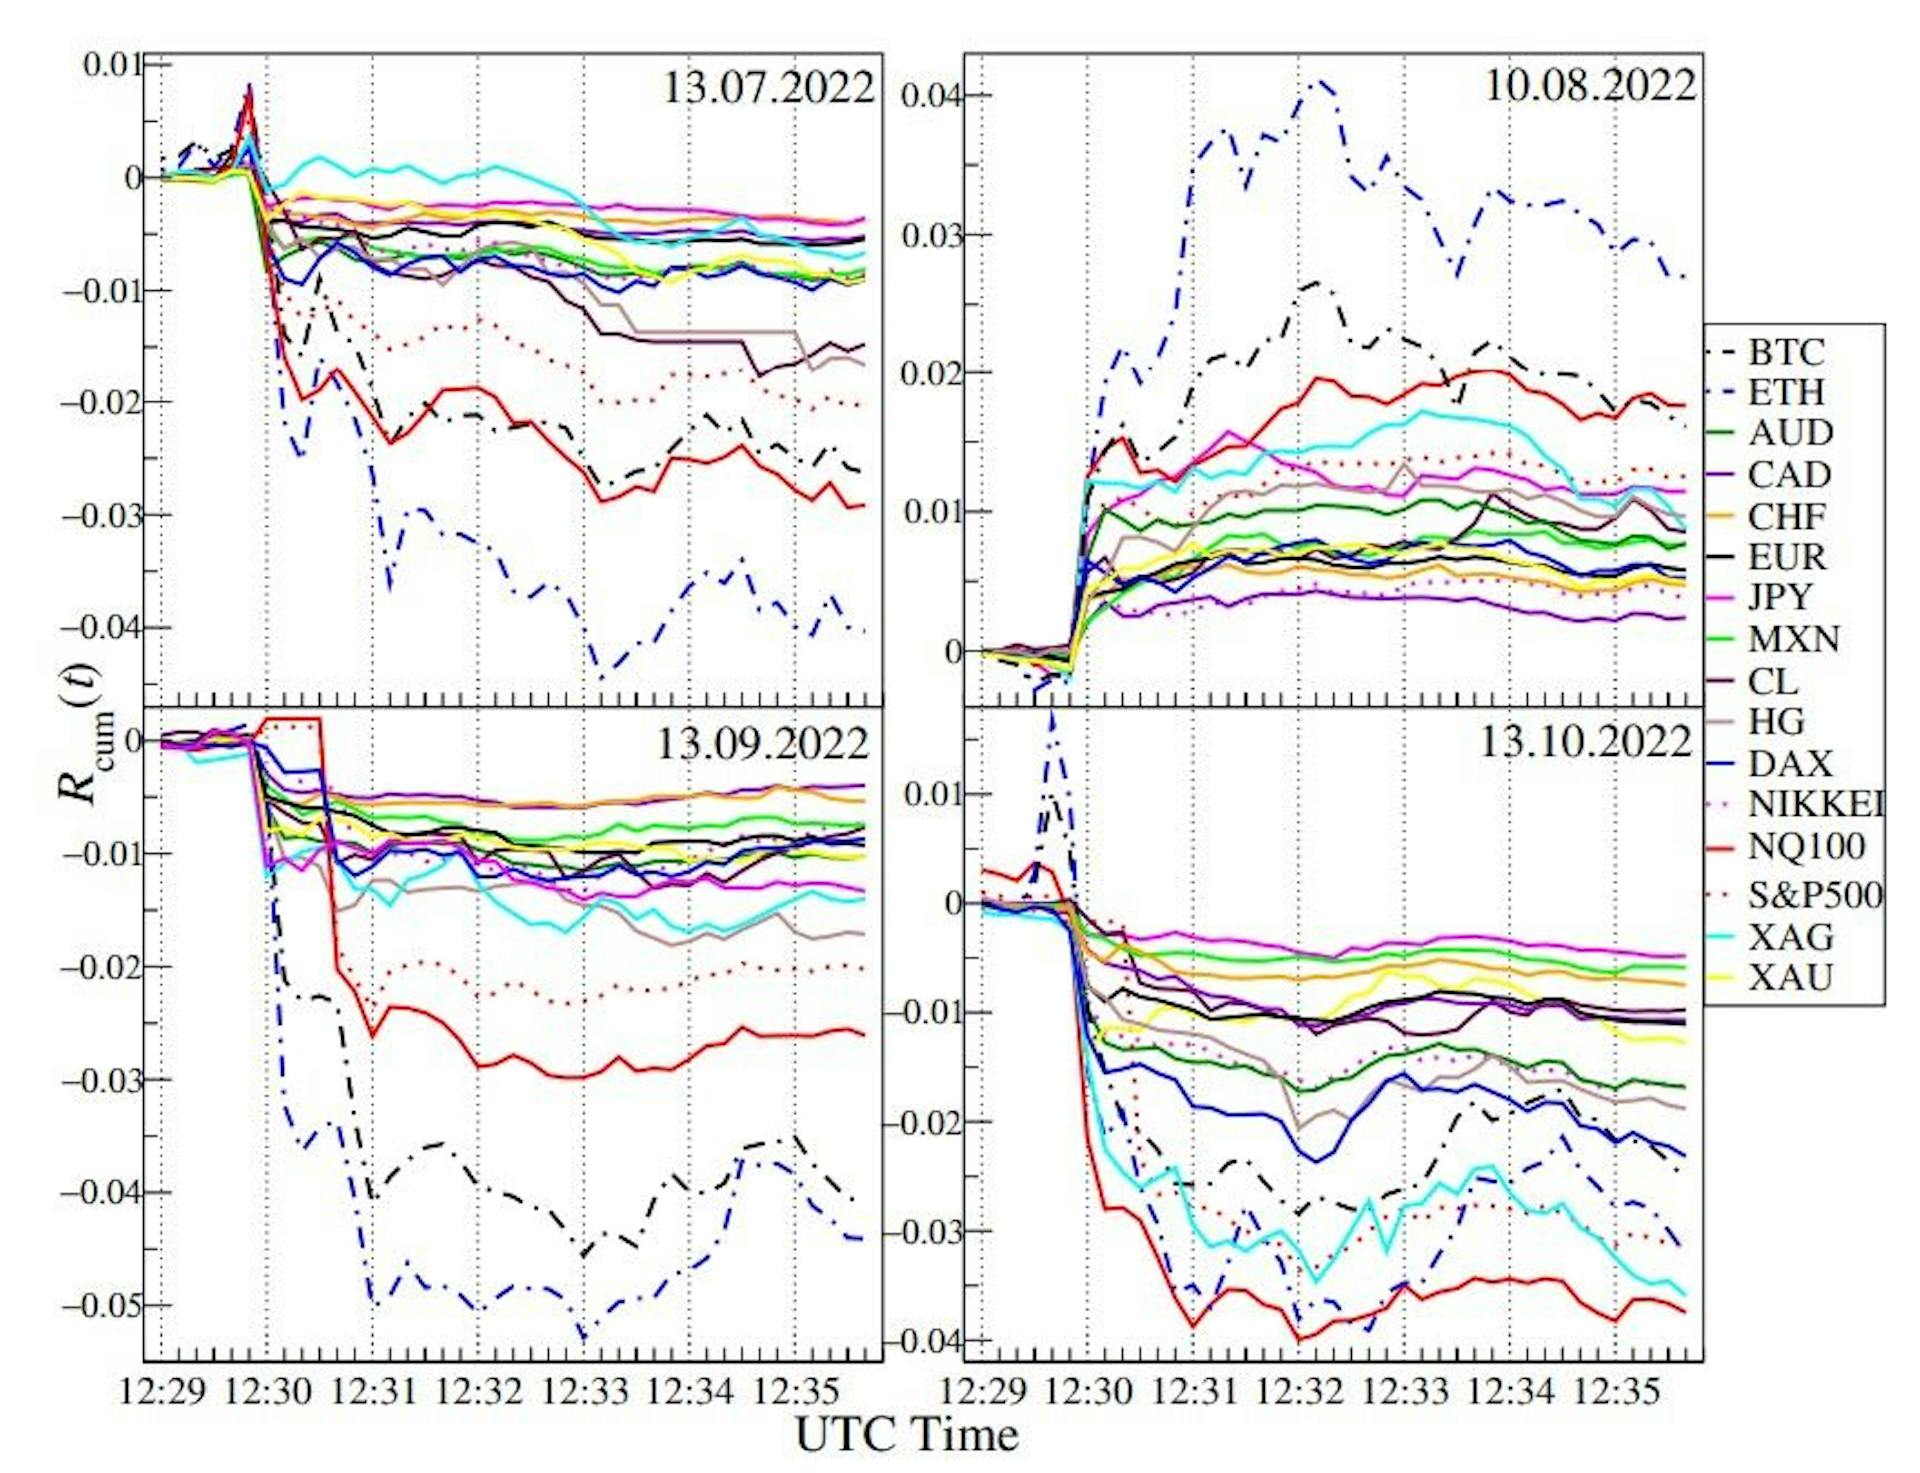 Figure 9. Evolution of the cumulative logarithmic returns Rcum of selected financial instruments: BTC, ETH, AUD, CAD, CHF, CL, DAX, EUR, HG, JPY, MXN, NIKKEI, NQ100, S&P500, XAG, and XAU on specific dates, around the publication time of the Consumer Price Index (CPI) report in the US.